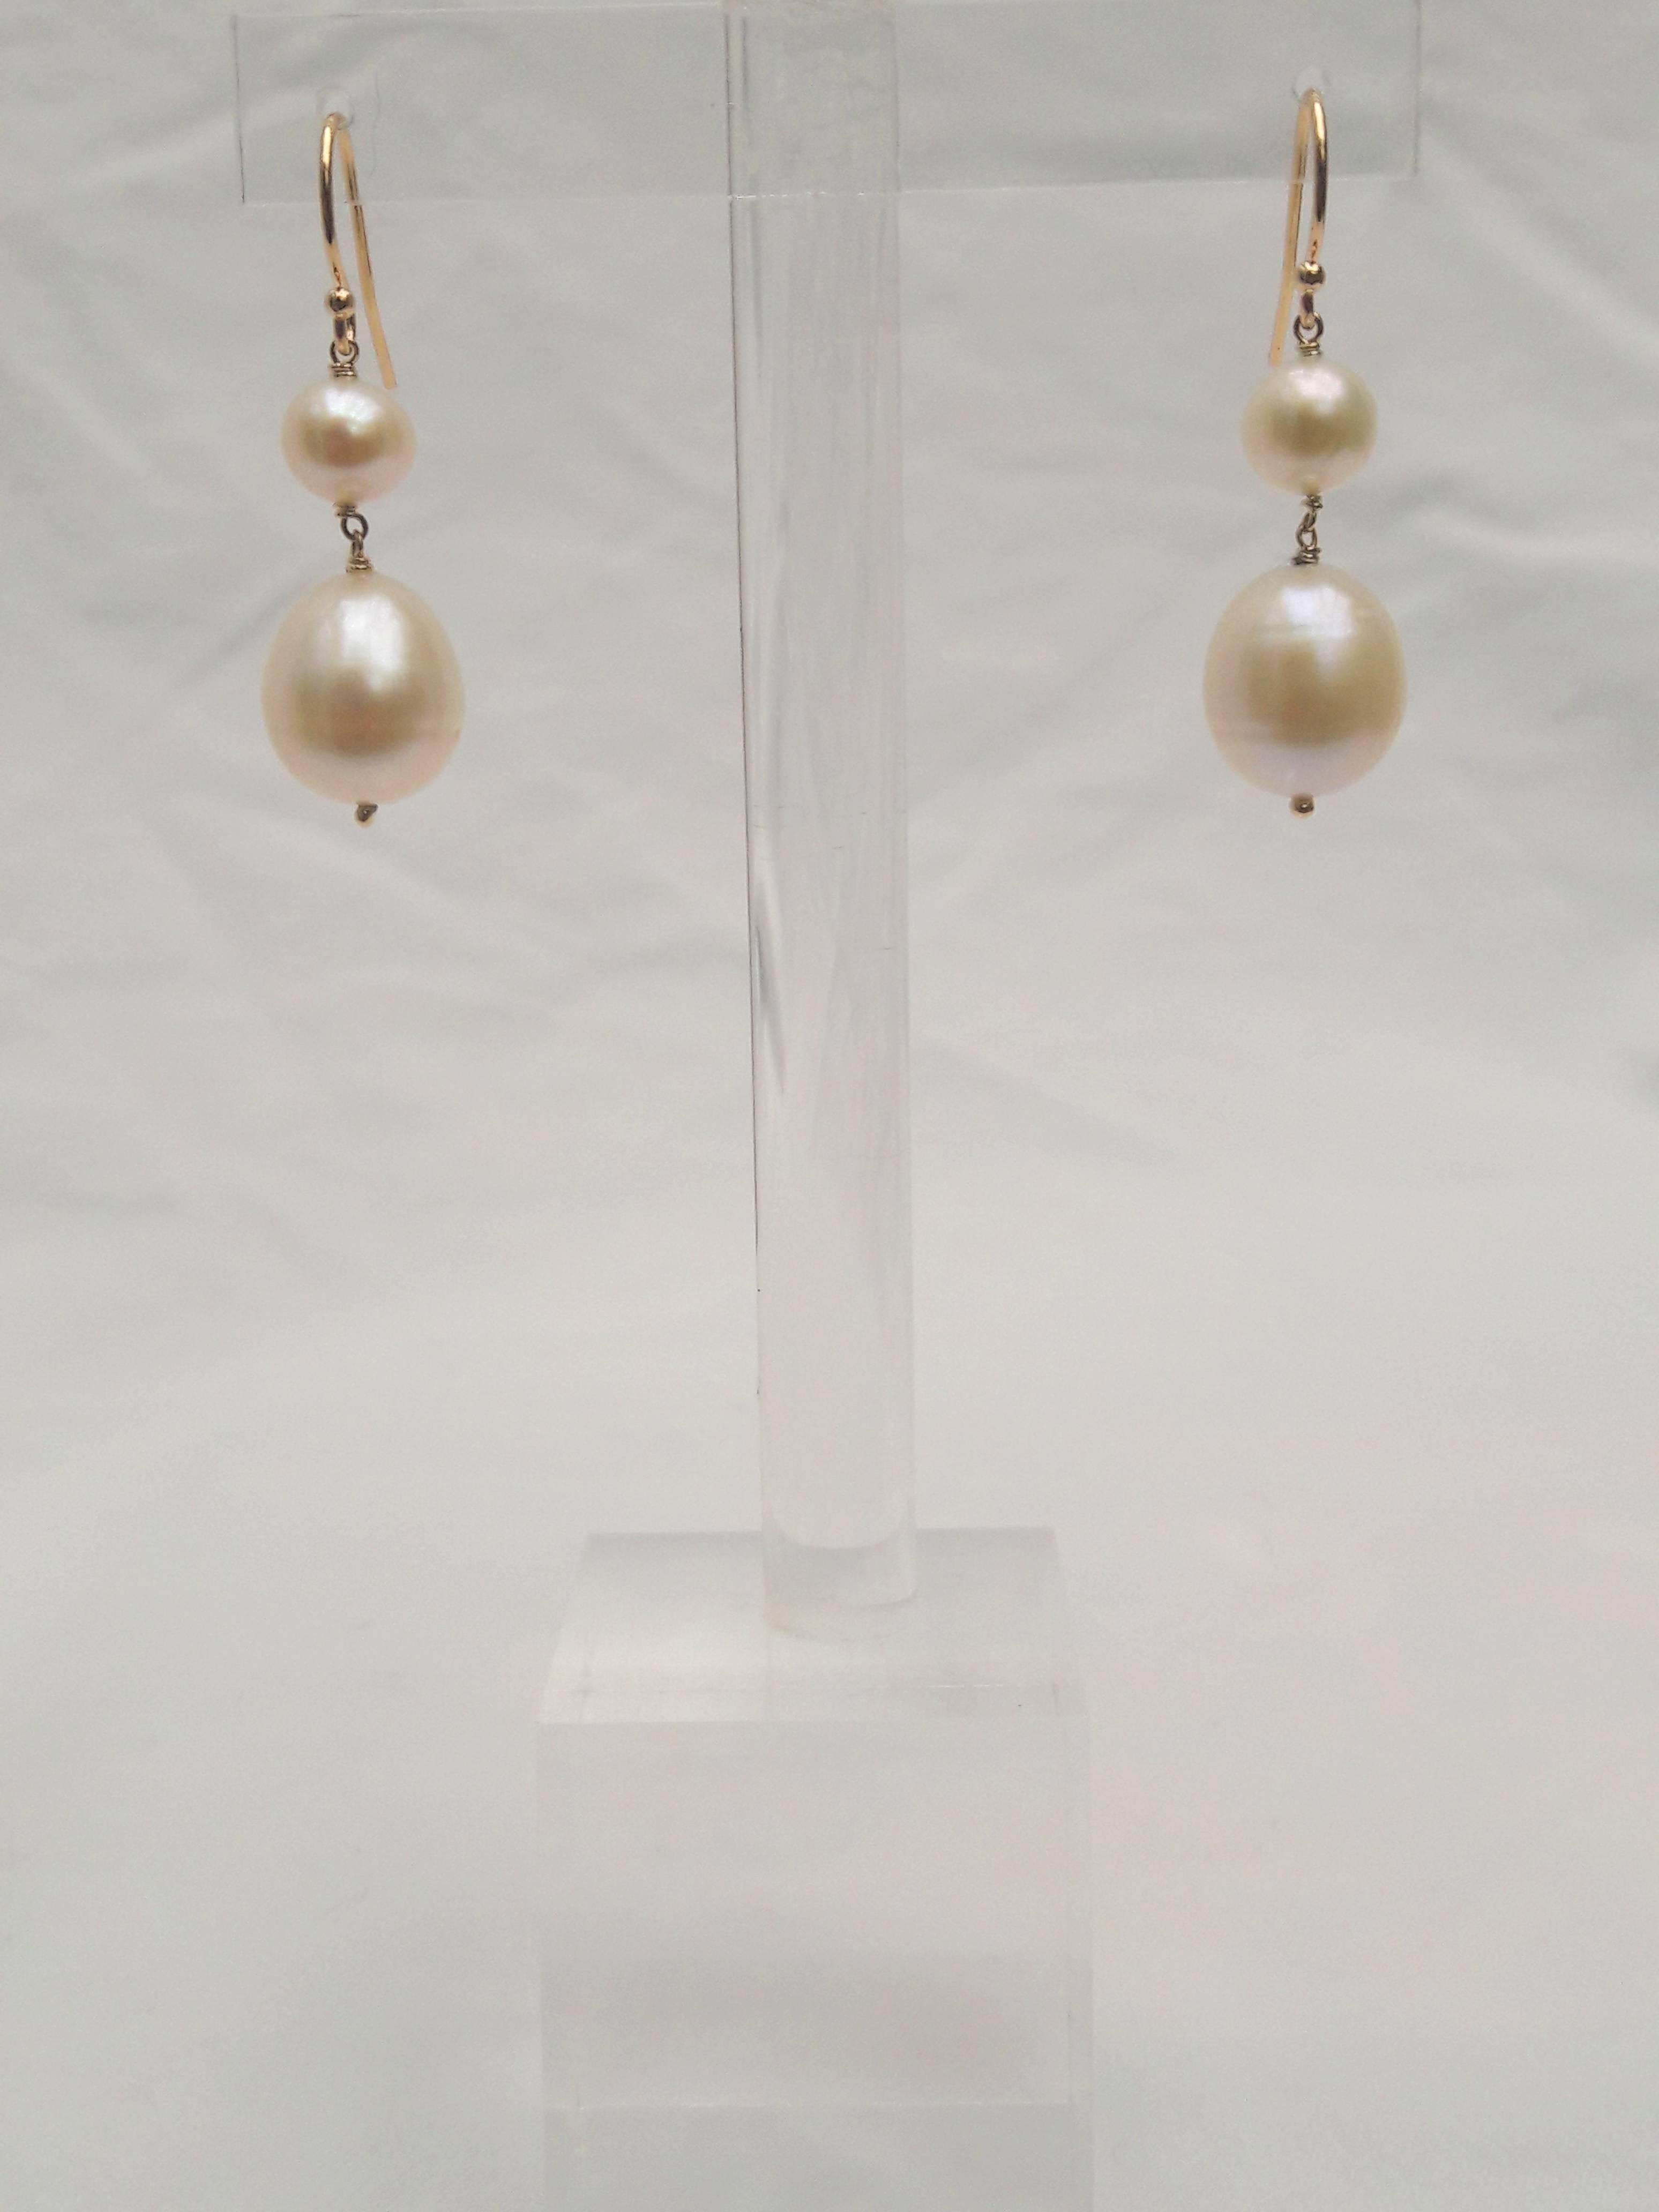 Elegant, yet understated.

These beautiful earring are composed of a pair of smooth white pearls suspended with gold findings. Dangling from a 14k yellow gold earwire, a 6mm round pearl sits atop a larger, oval shaped 11mm pearl. This classic